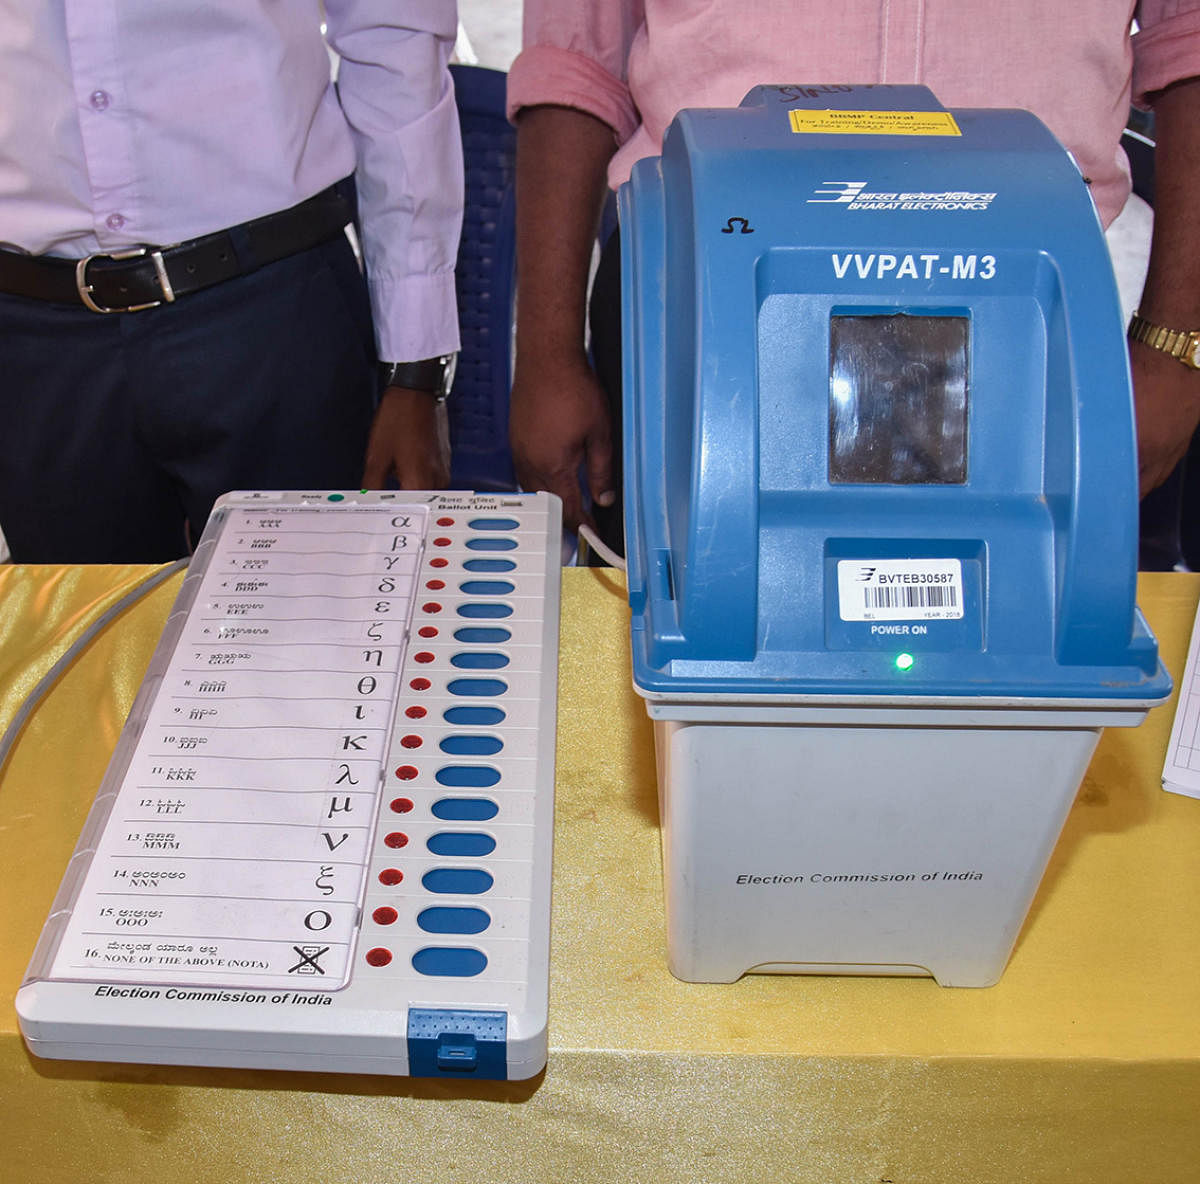 This is what your electronic voting machine looks like. It works with a paper audit system (right). photo by S K Dinesh